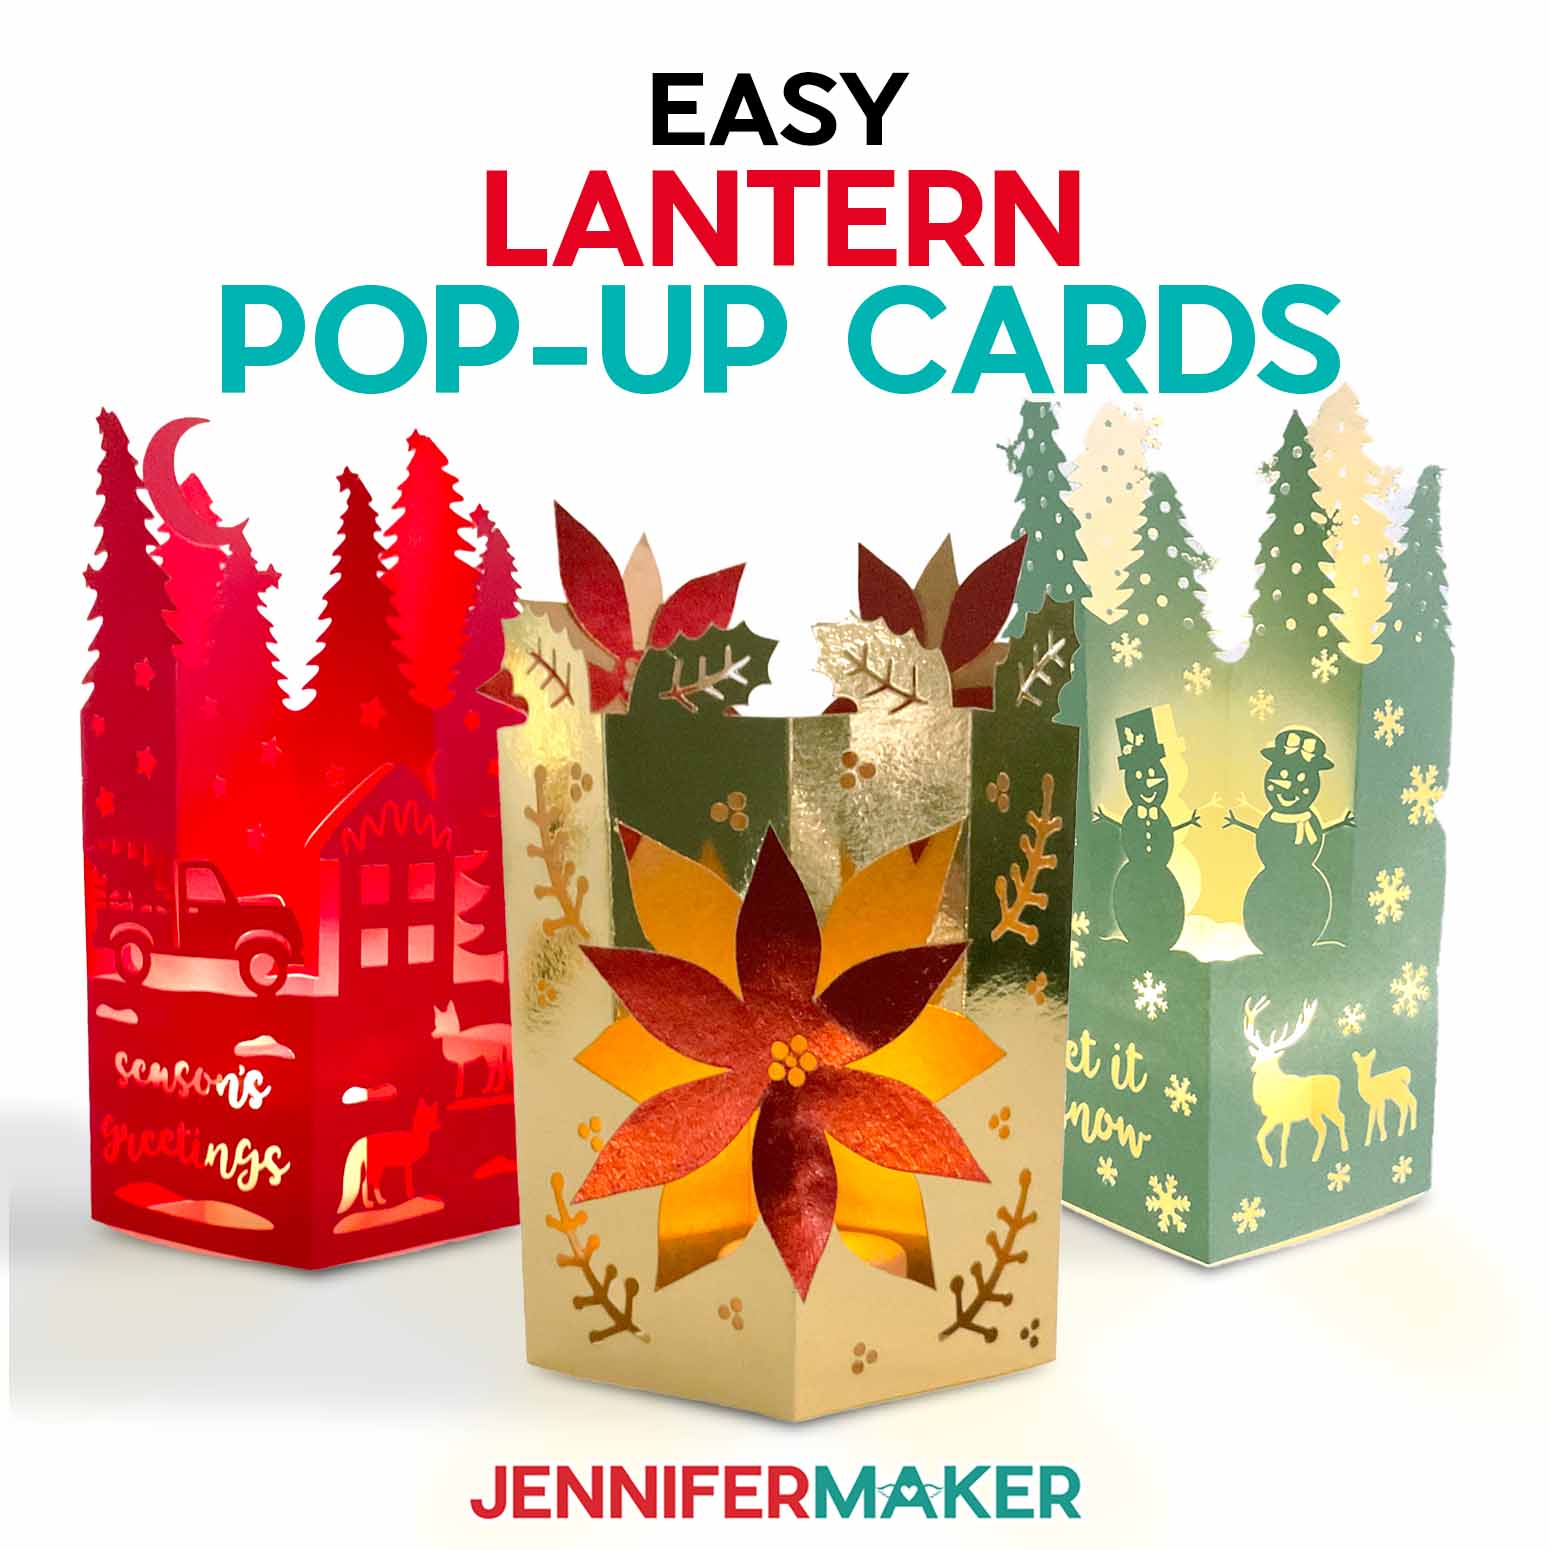 Lantern Pop-Up Cards for a 3D Christmas Greeting!